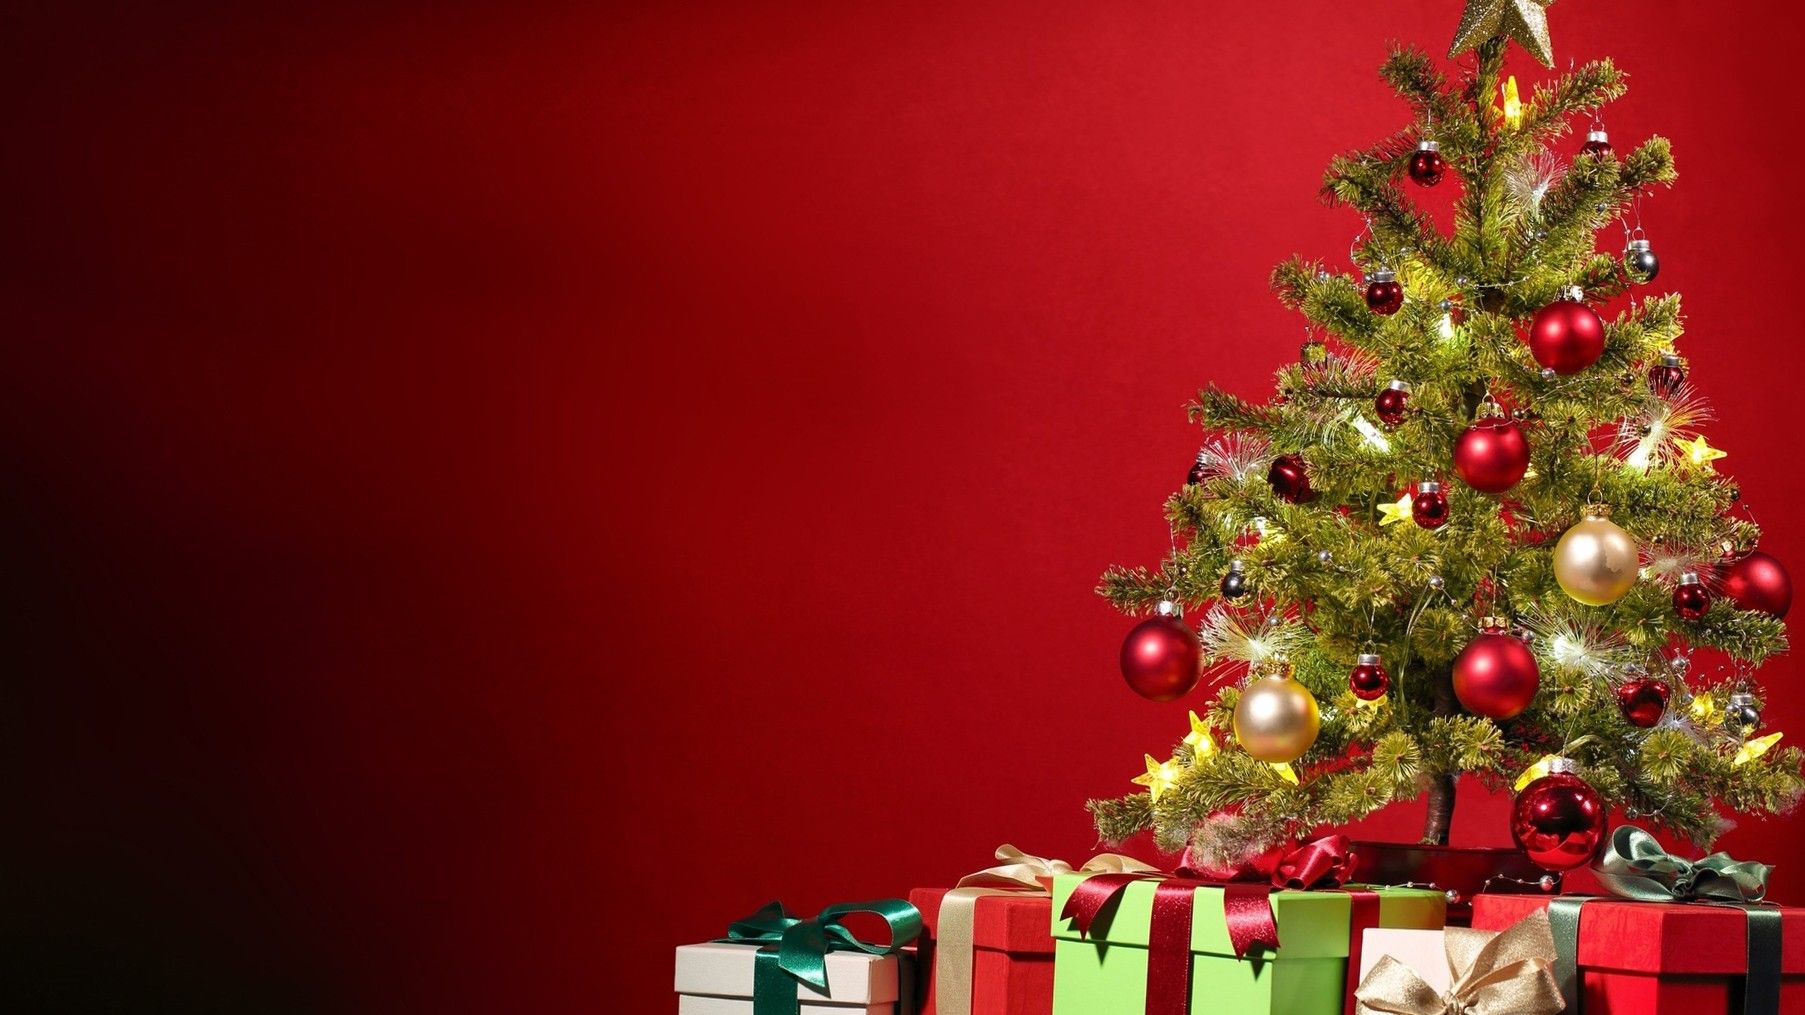 Christmas Tree With Gifts On The Red Background